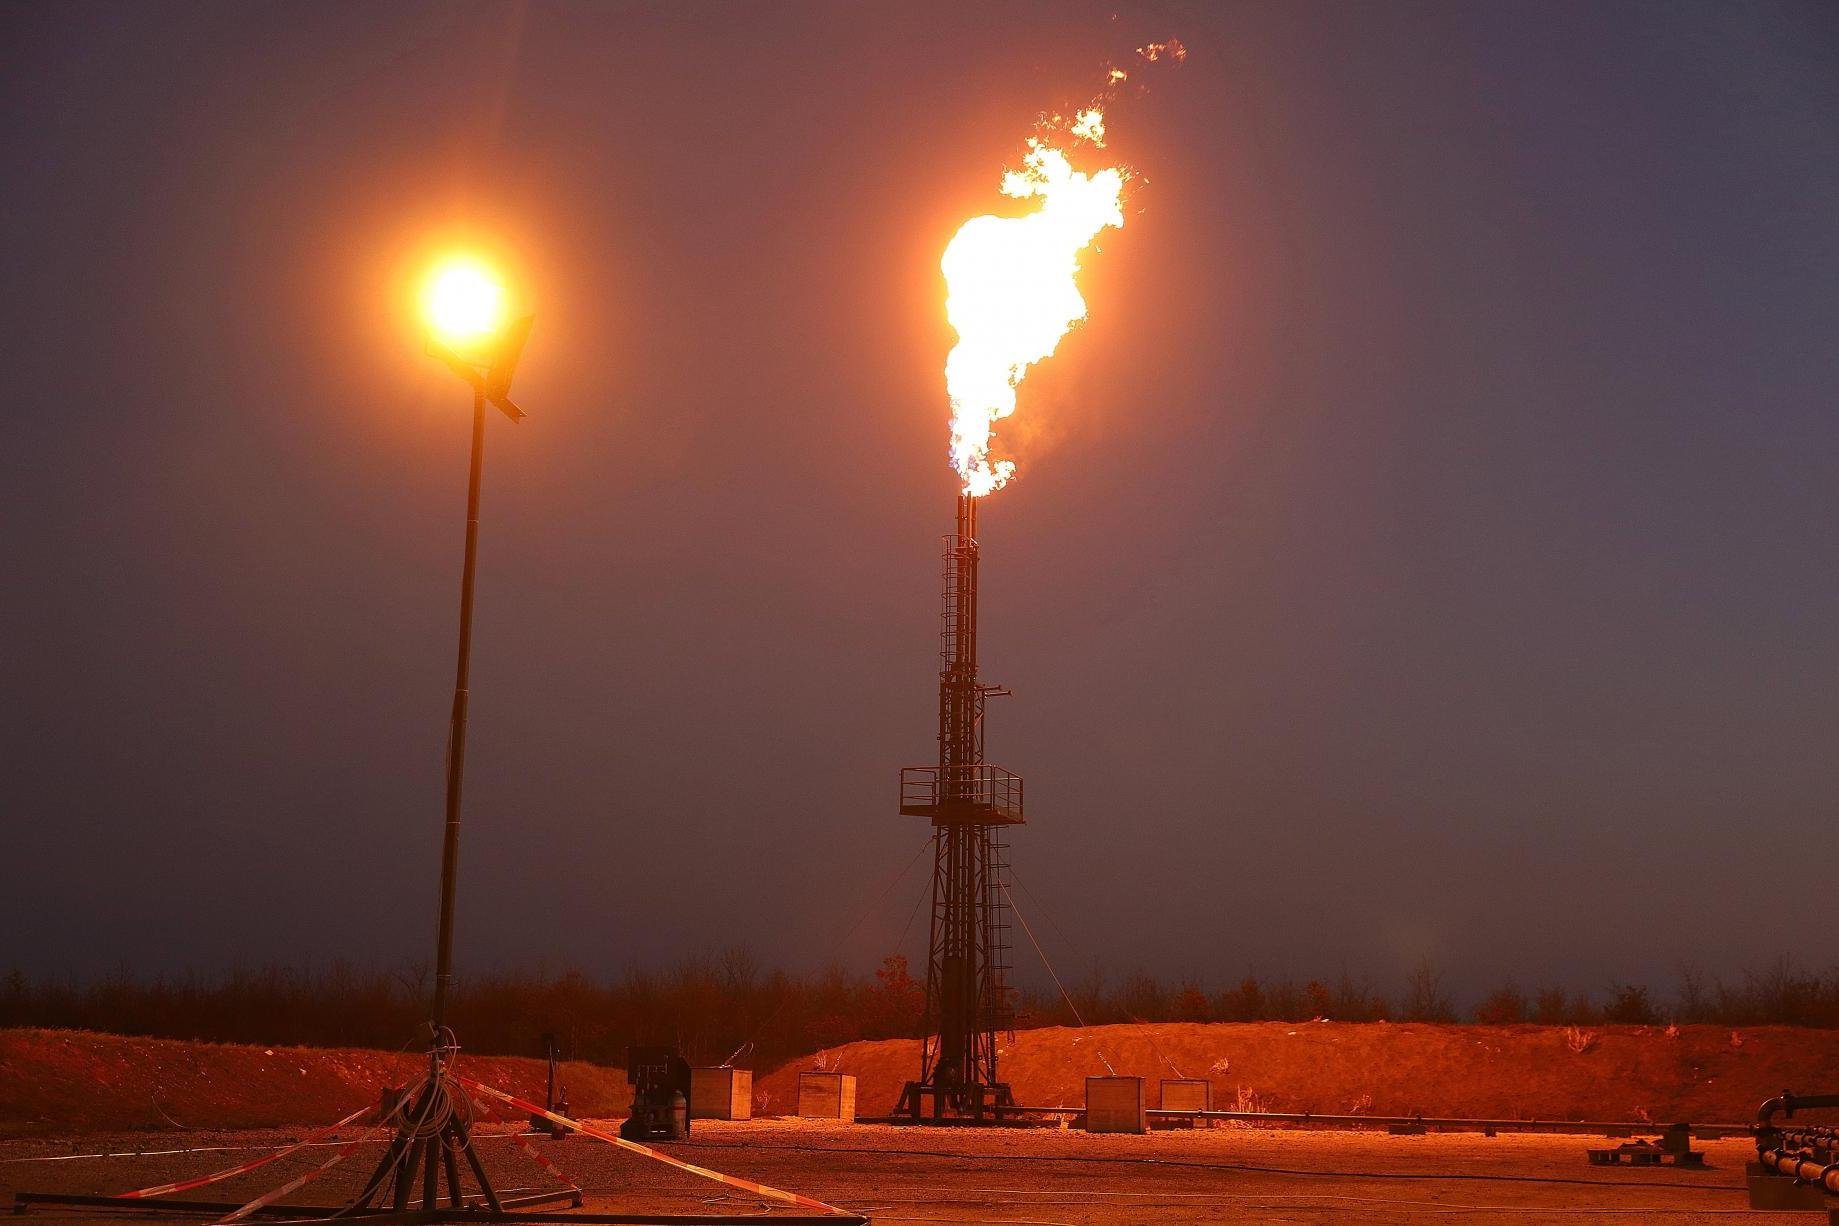 Production Starts at the Country’s newest Natural Gas Field [Video]